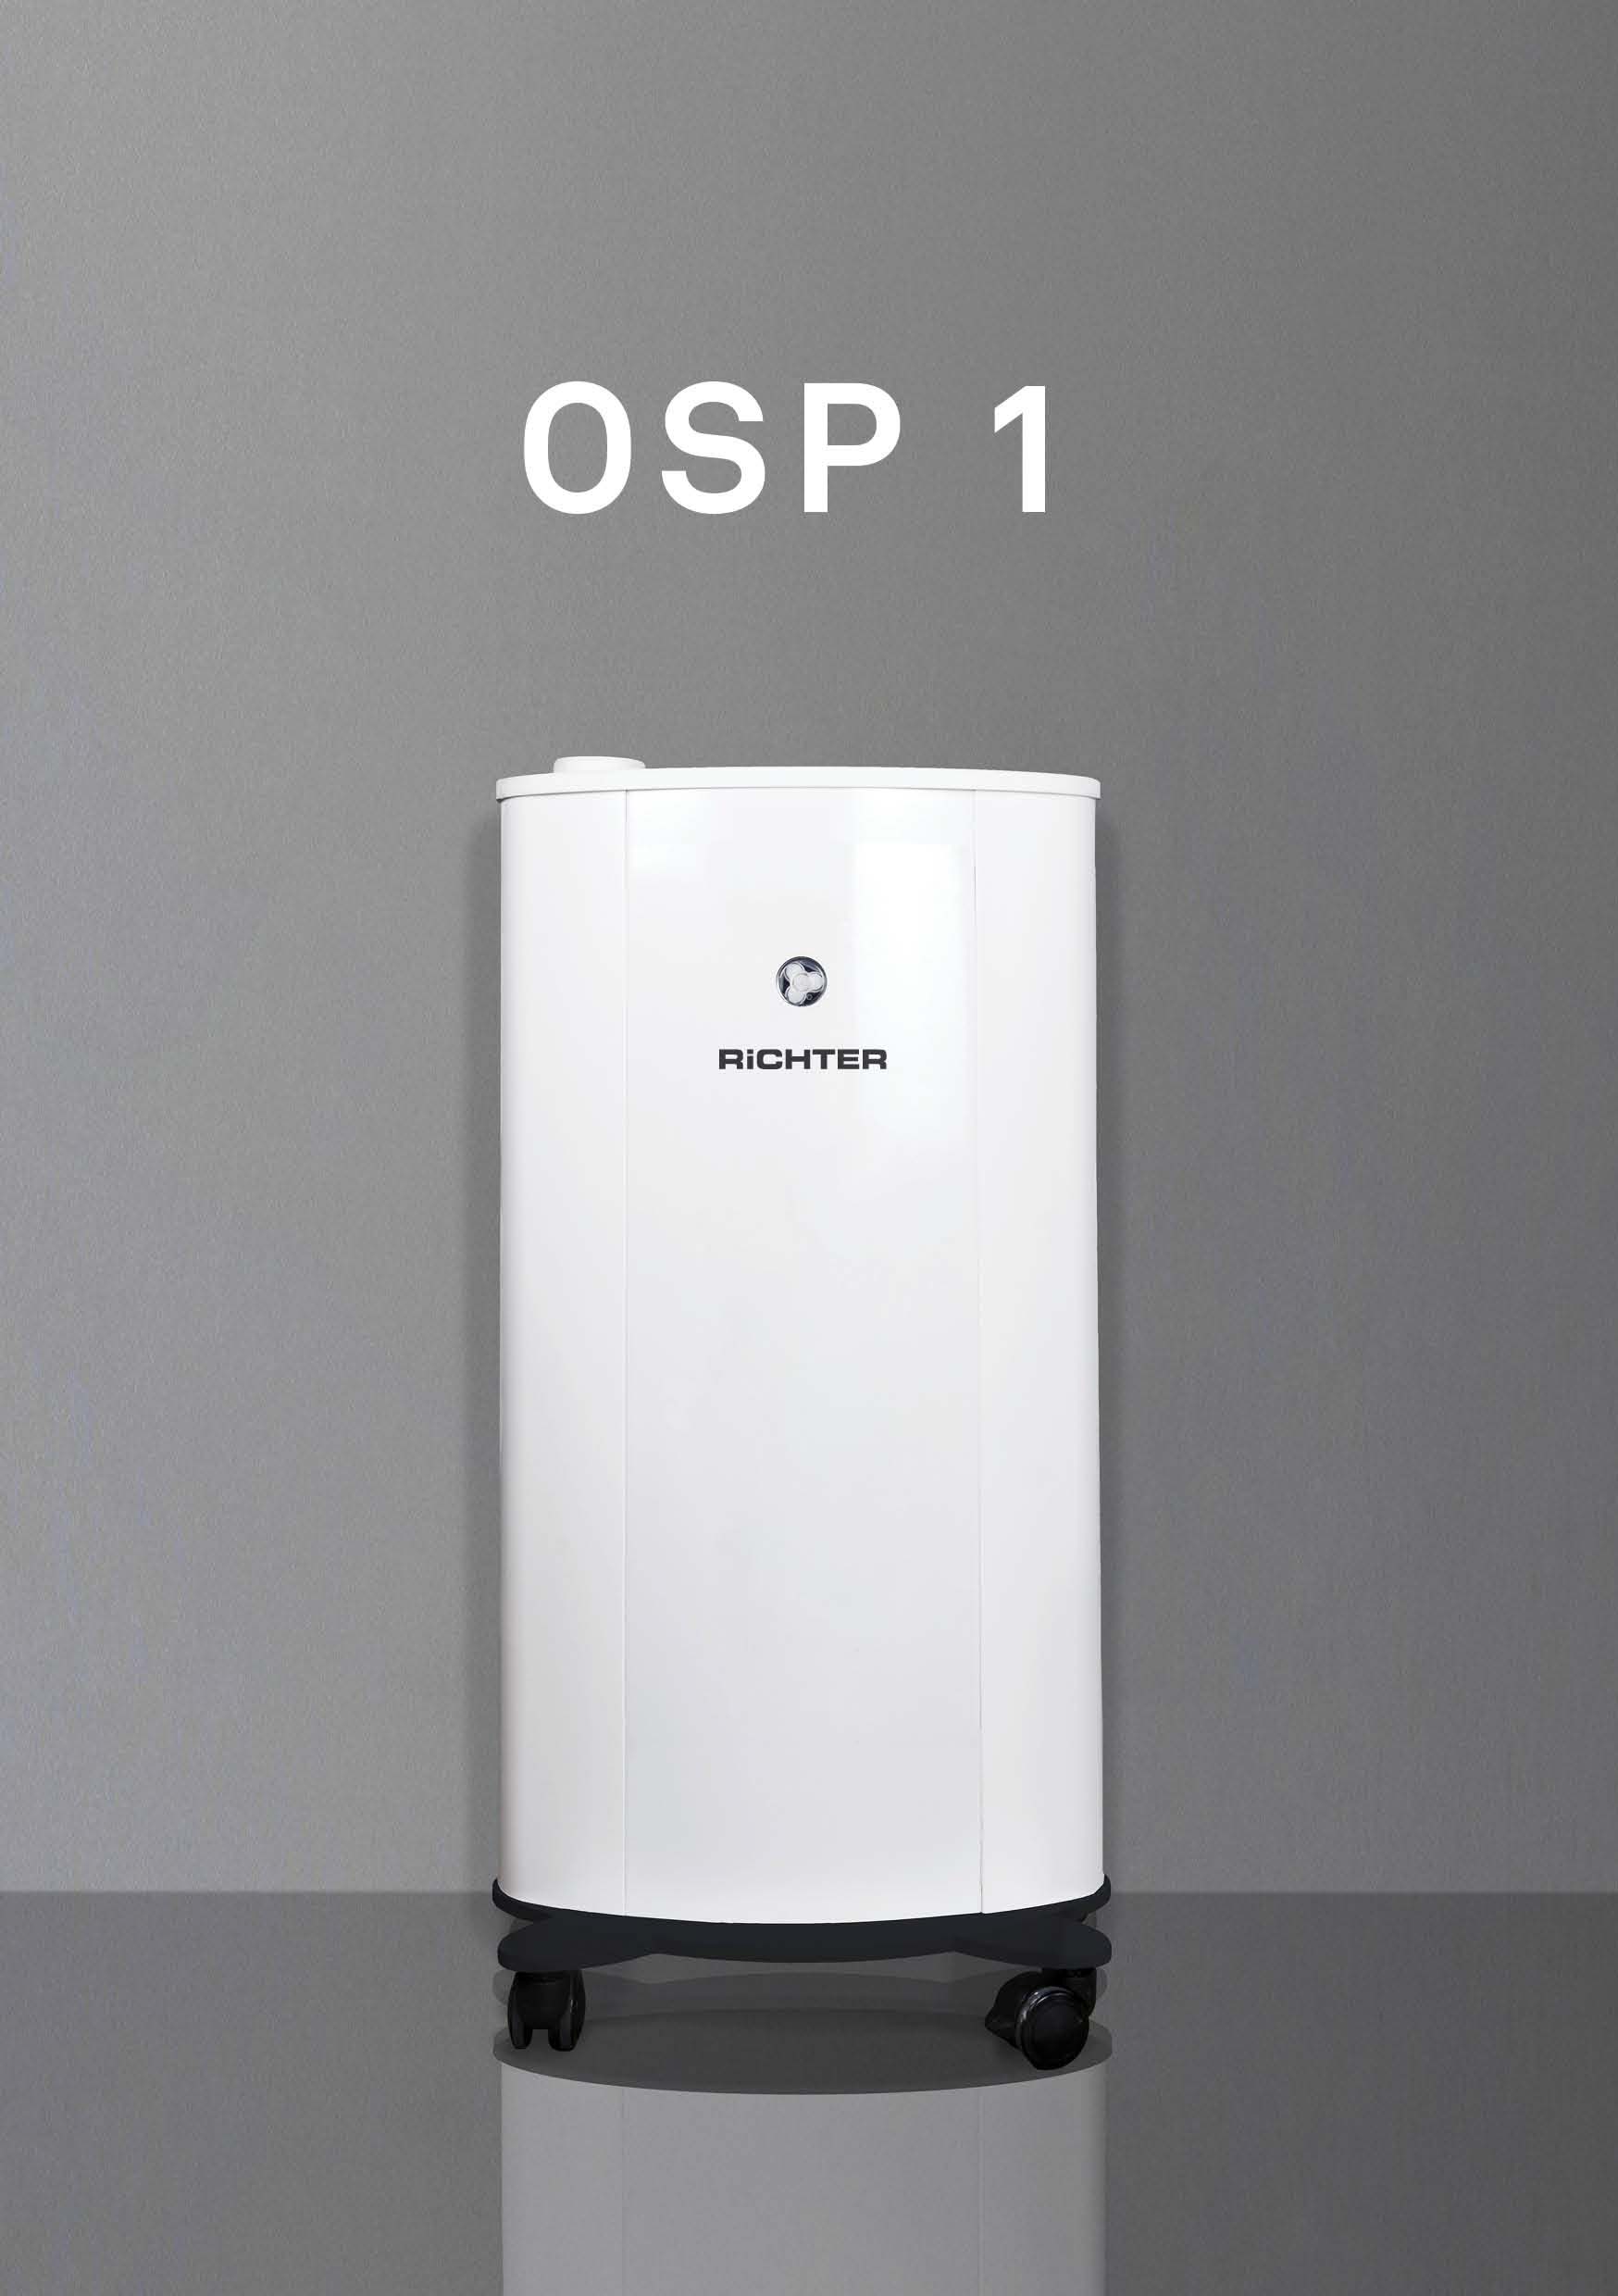 white OSP1 aircleaner next to a gray wall